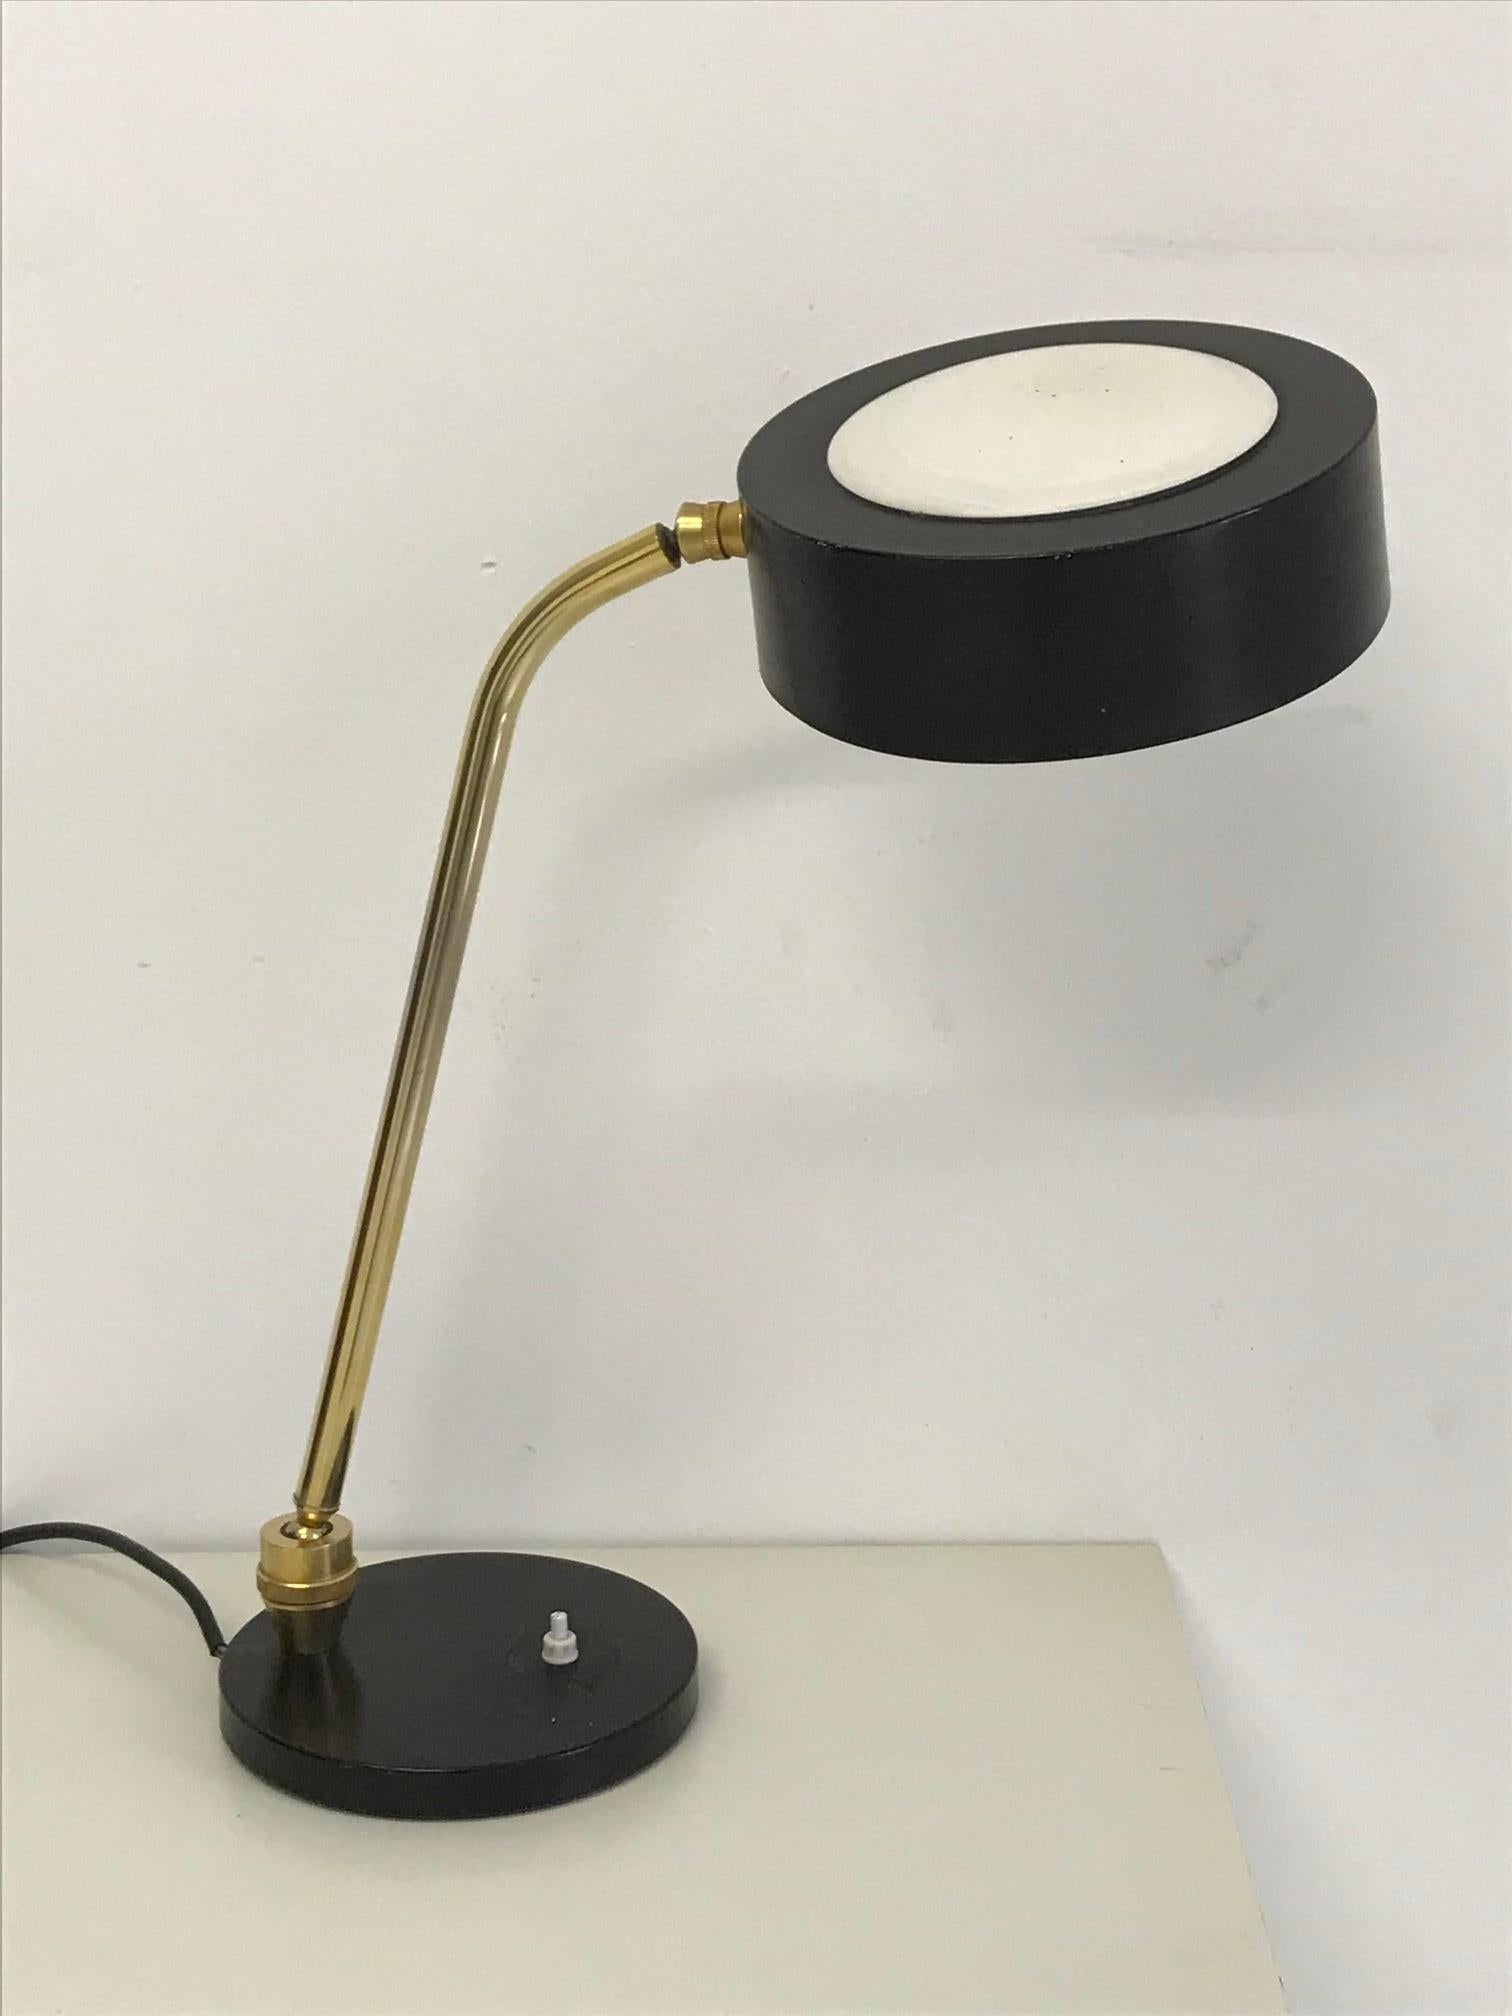 Charlotte Perriand vintage table lamp, made of lacquered metal and golden brass.